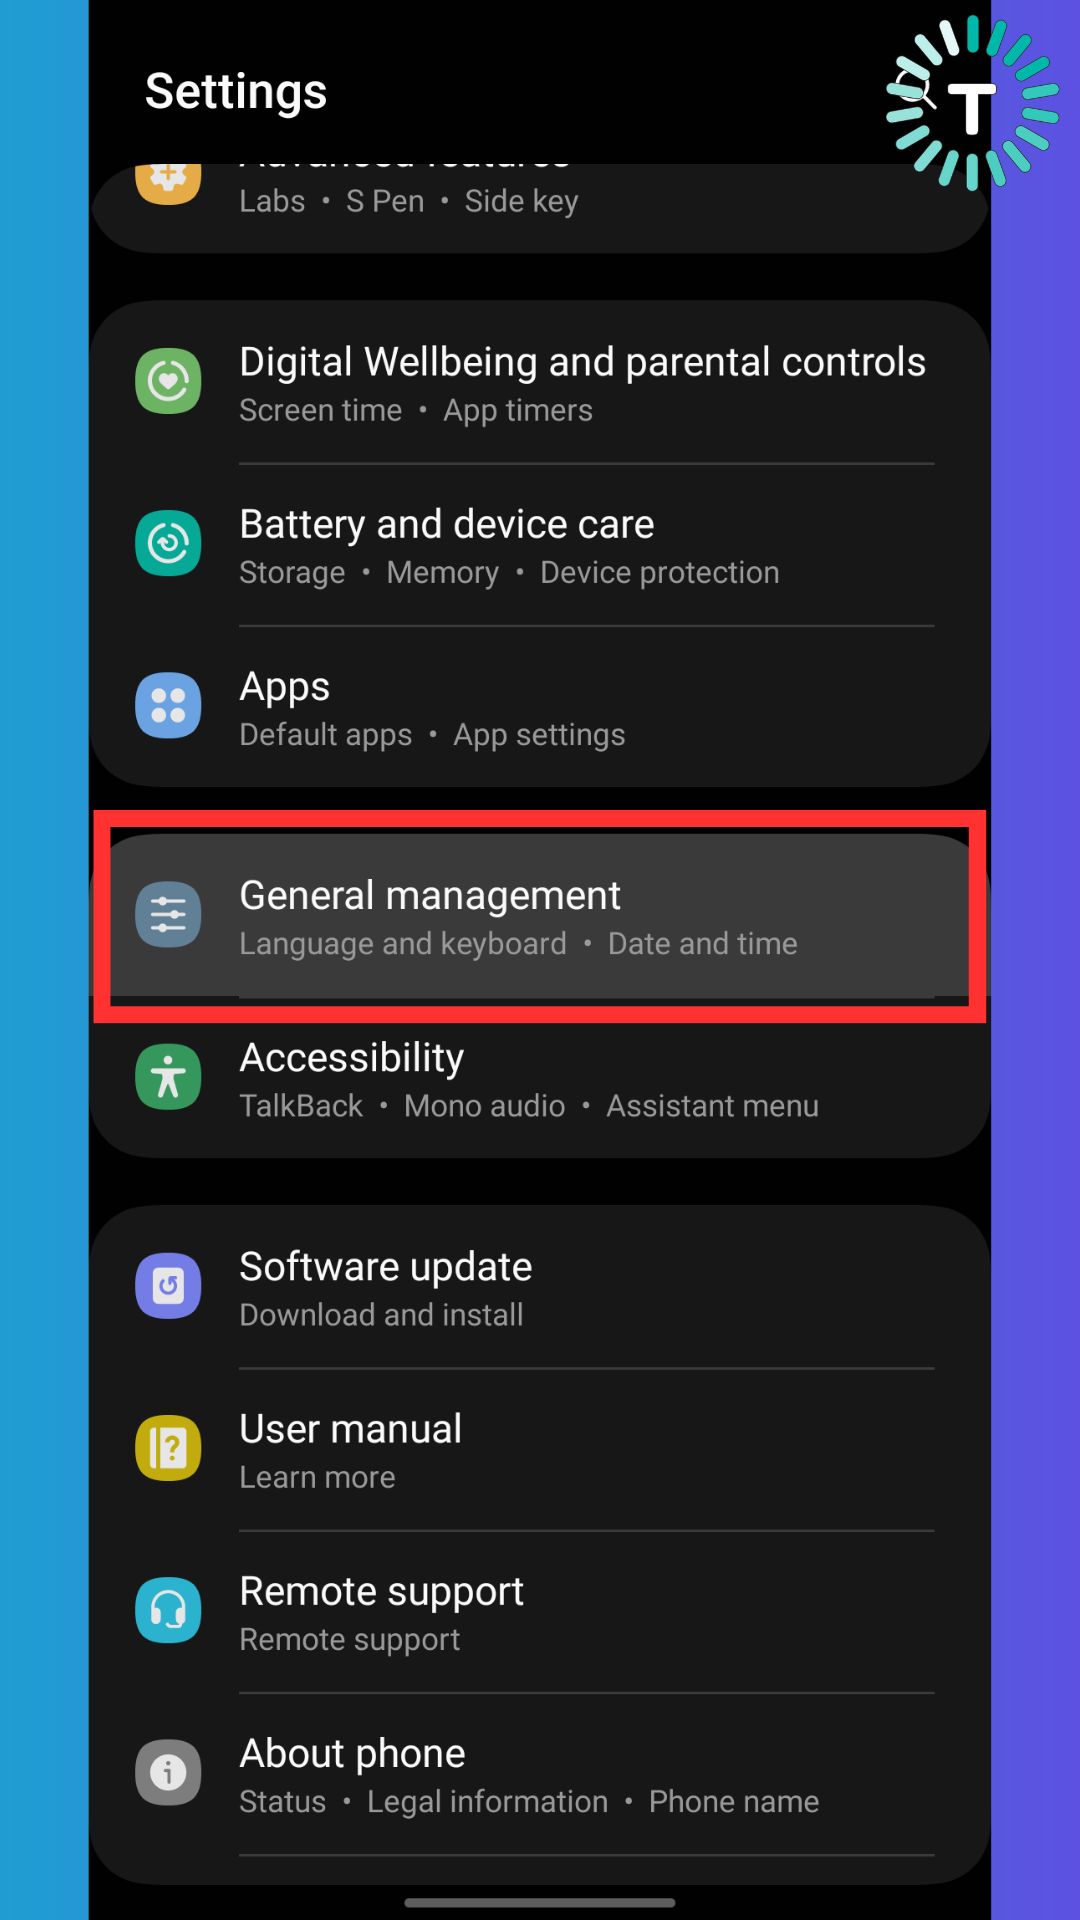 Go to Settings and tap on General management